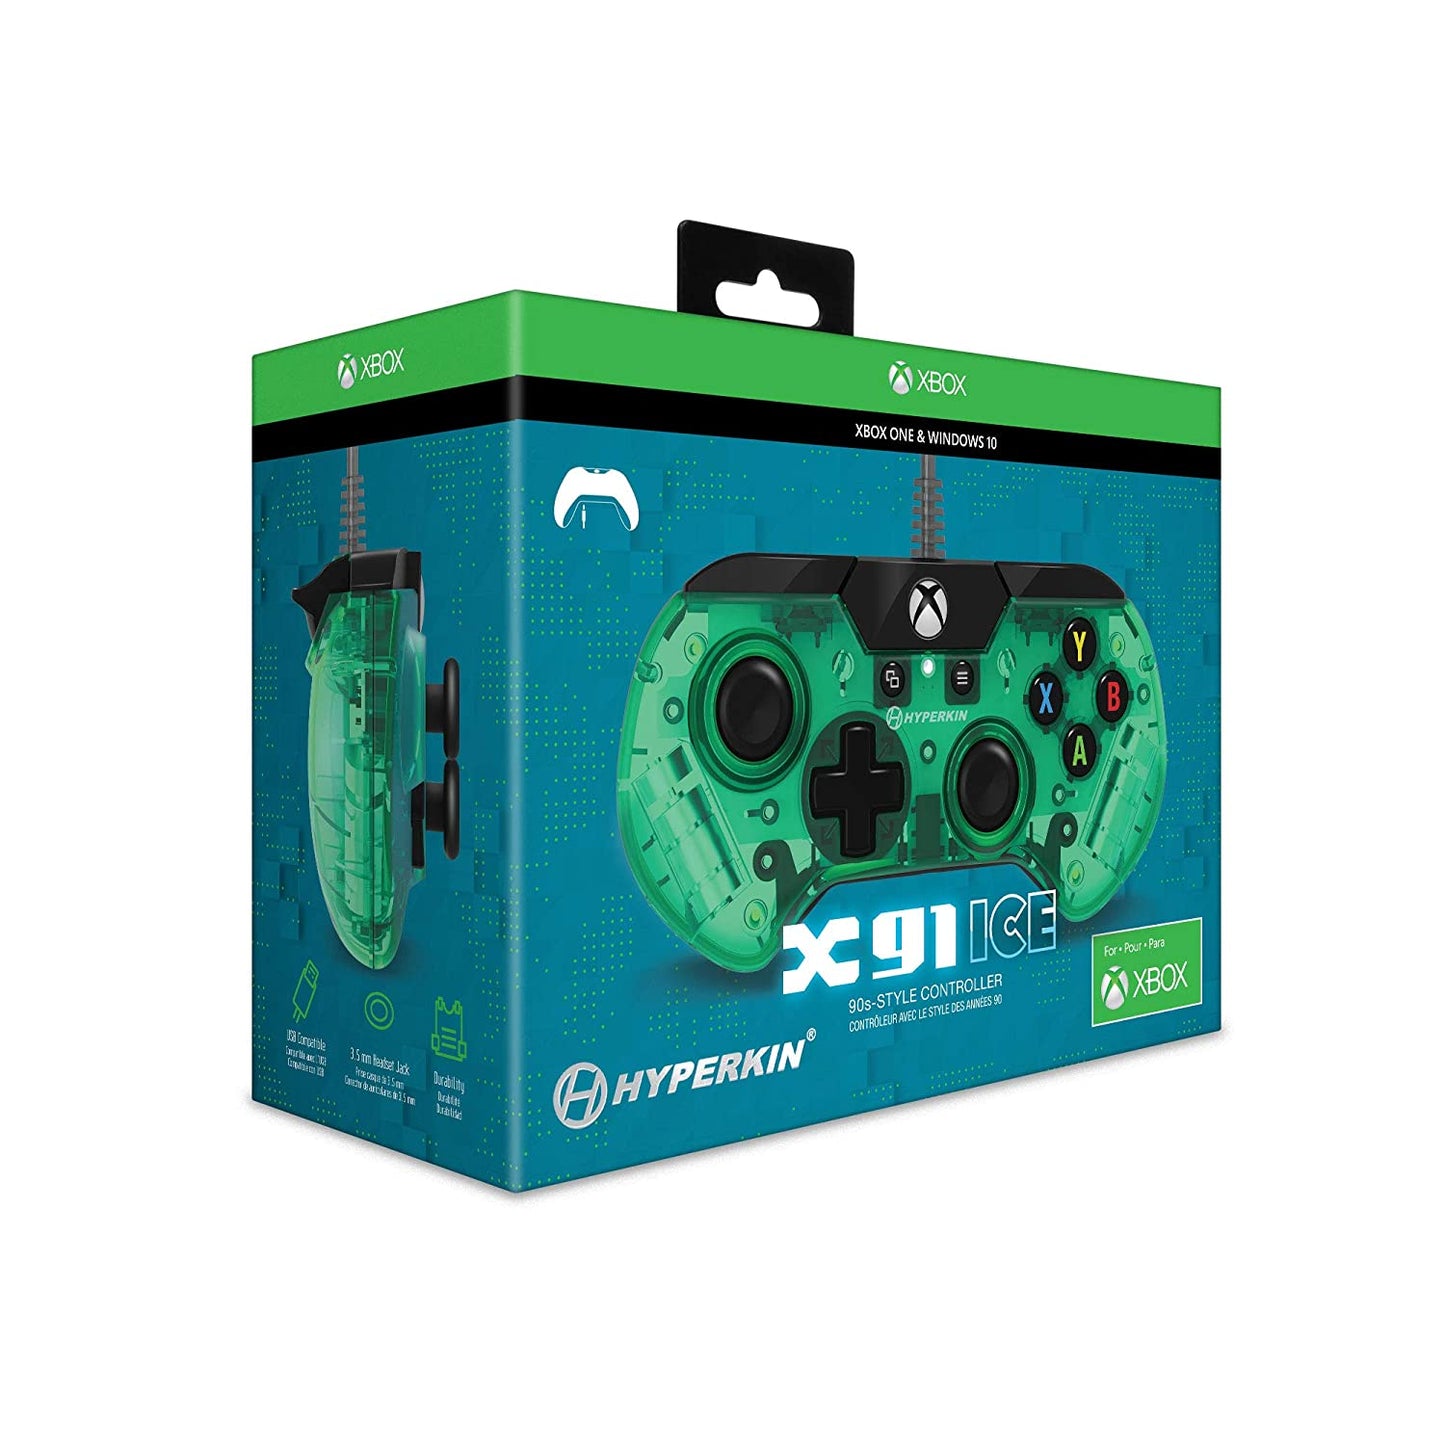 X91 Ice Wired Controller for Xbox One/Windows 10 PC (Aqua Green) - Hyperkin - Officially Licensed by Xbox